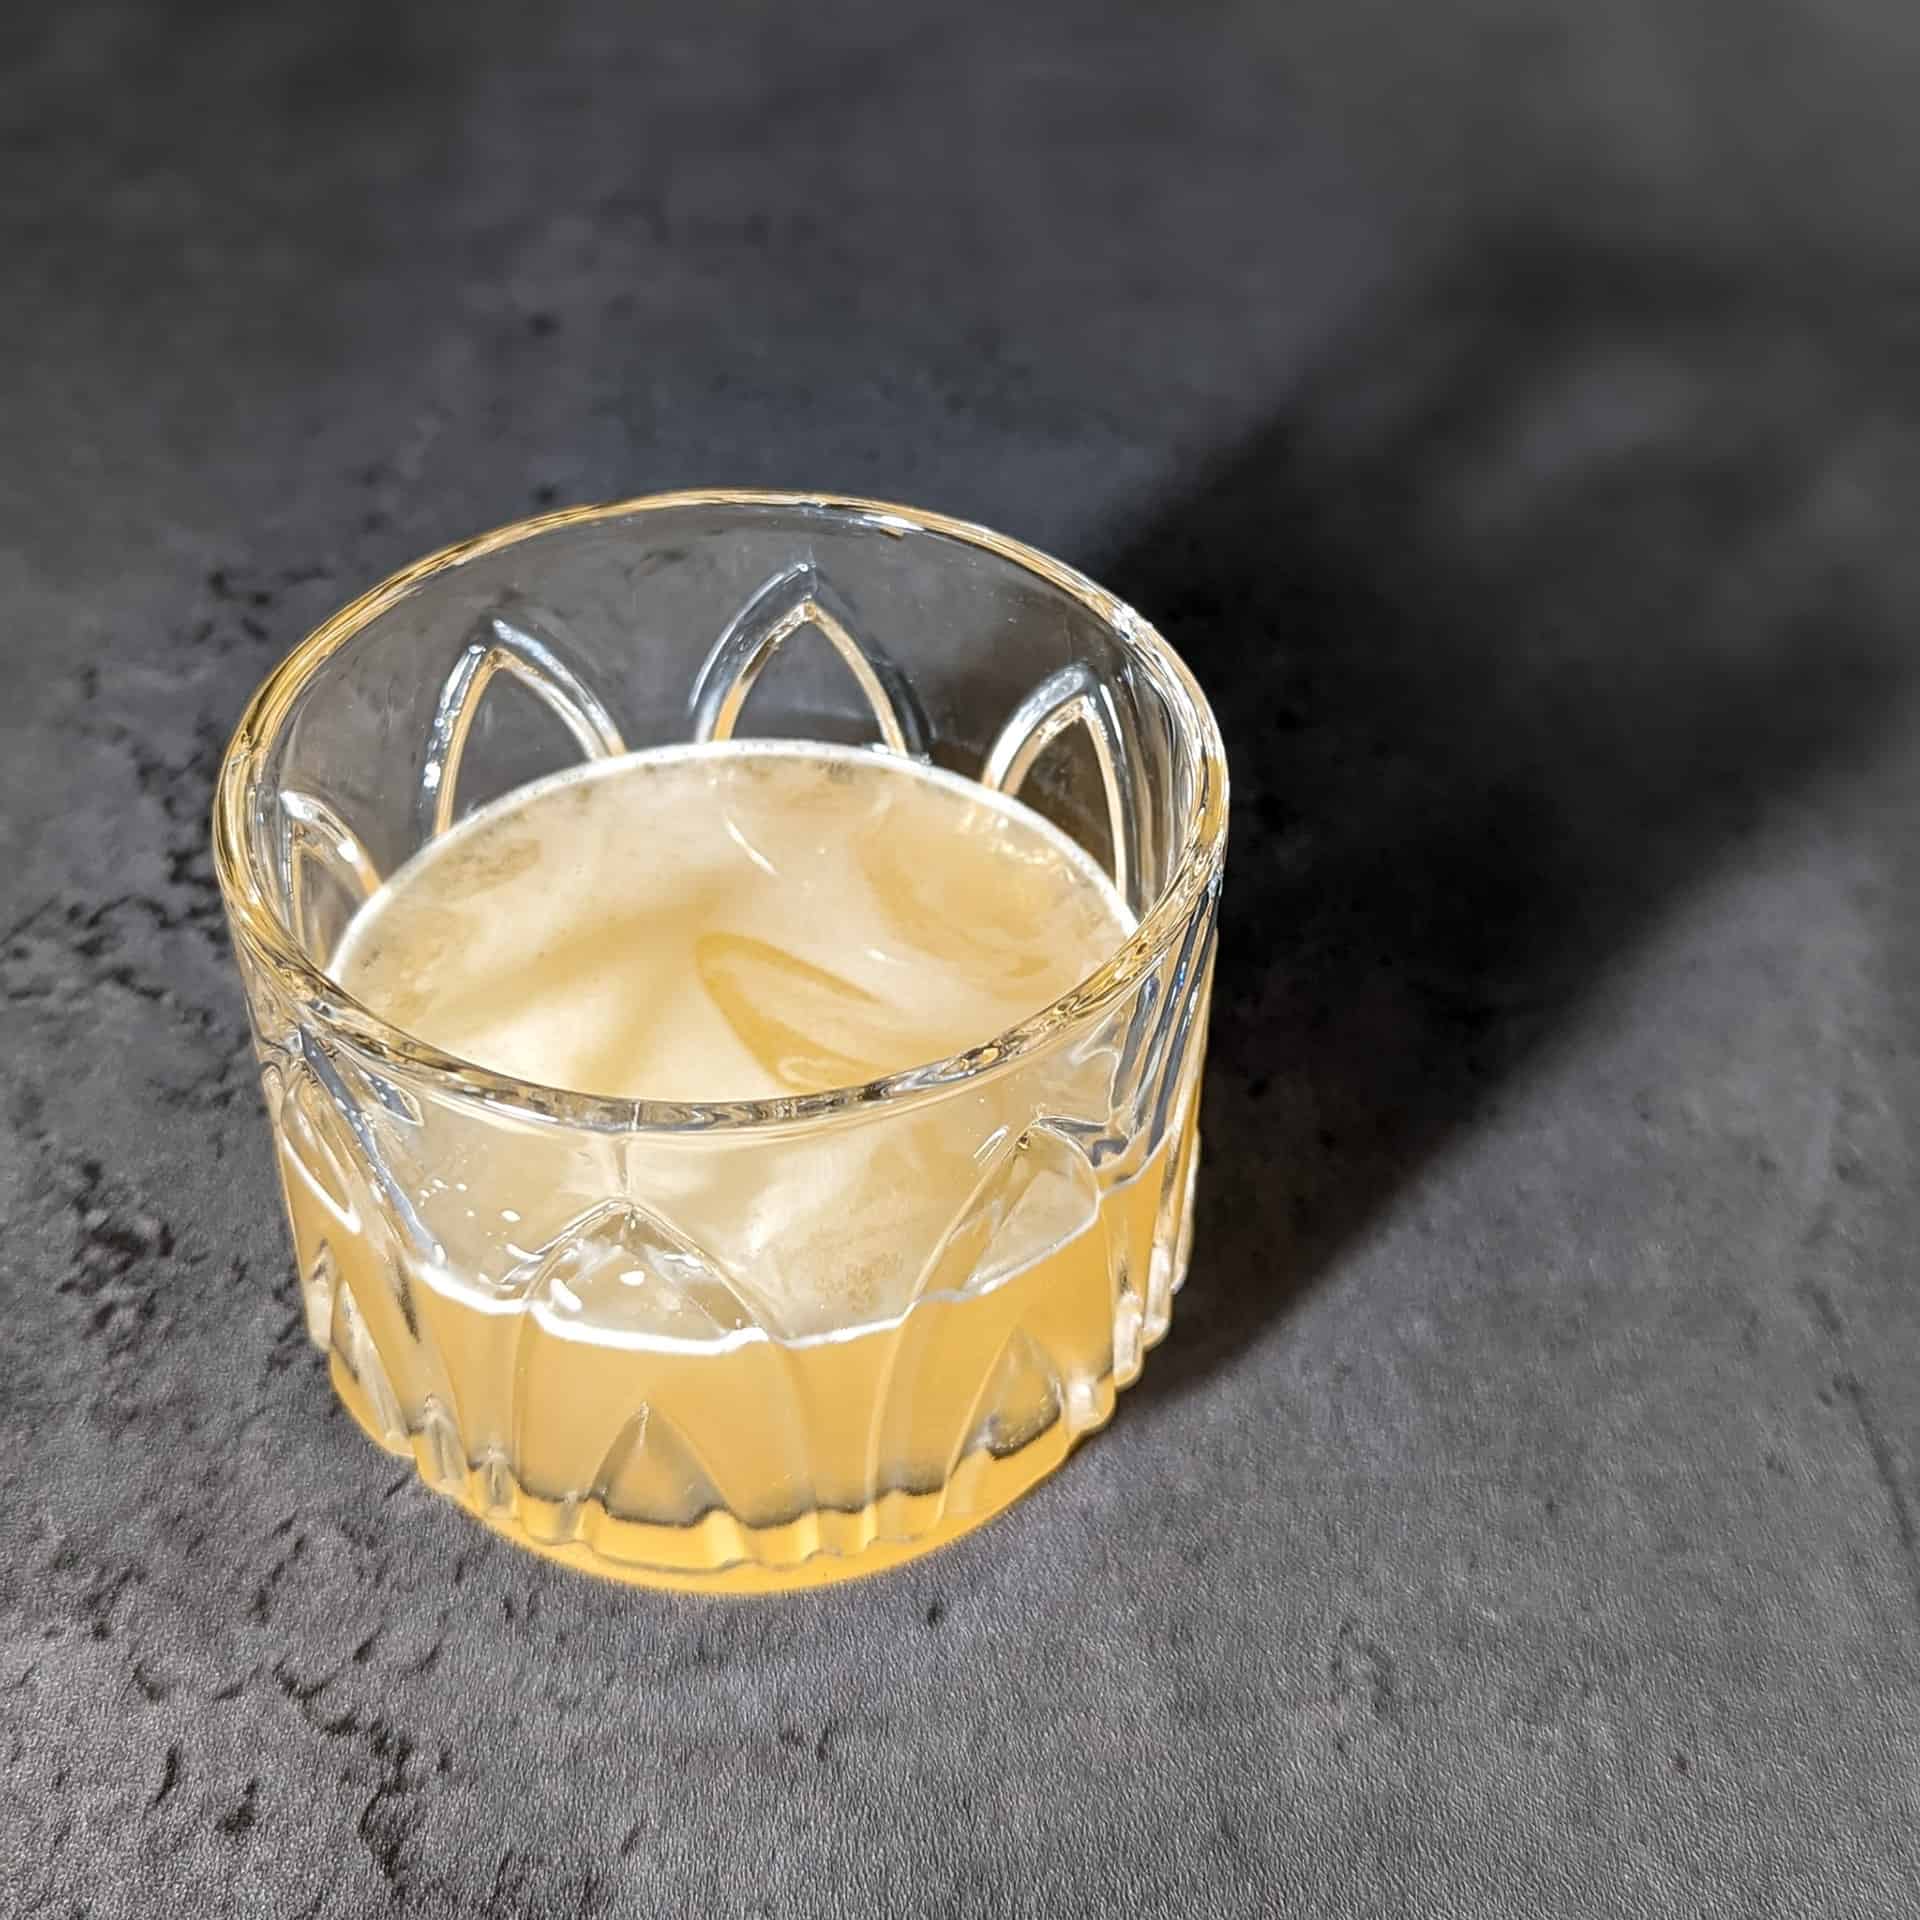 A mezcal sour cocktail made with lemon juice and honey